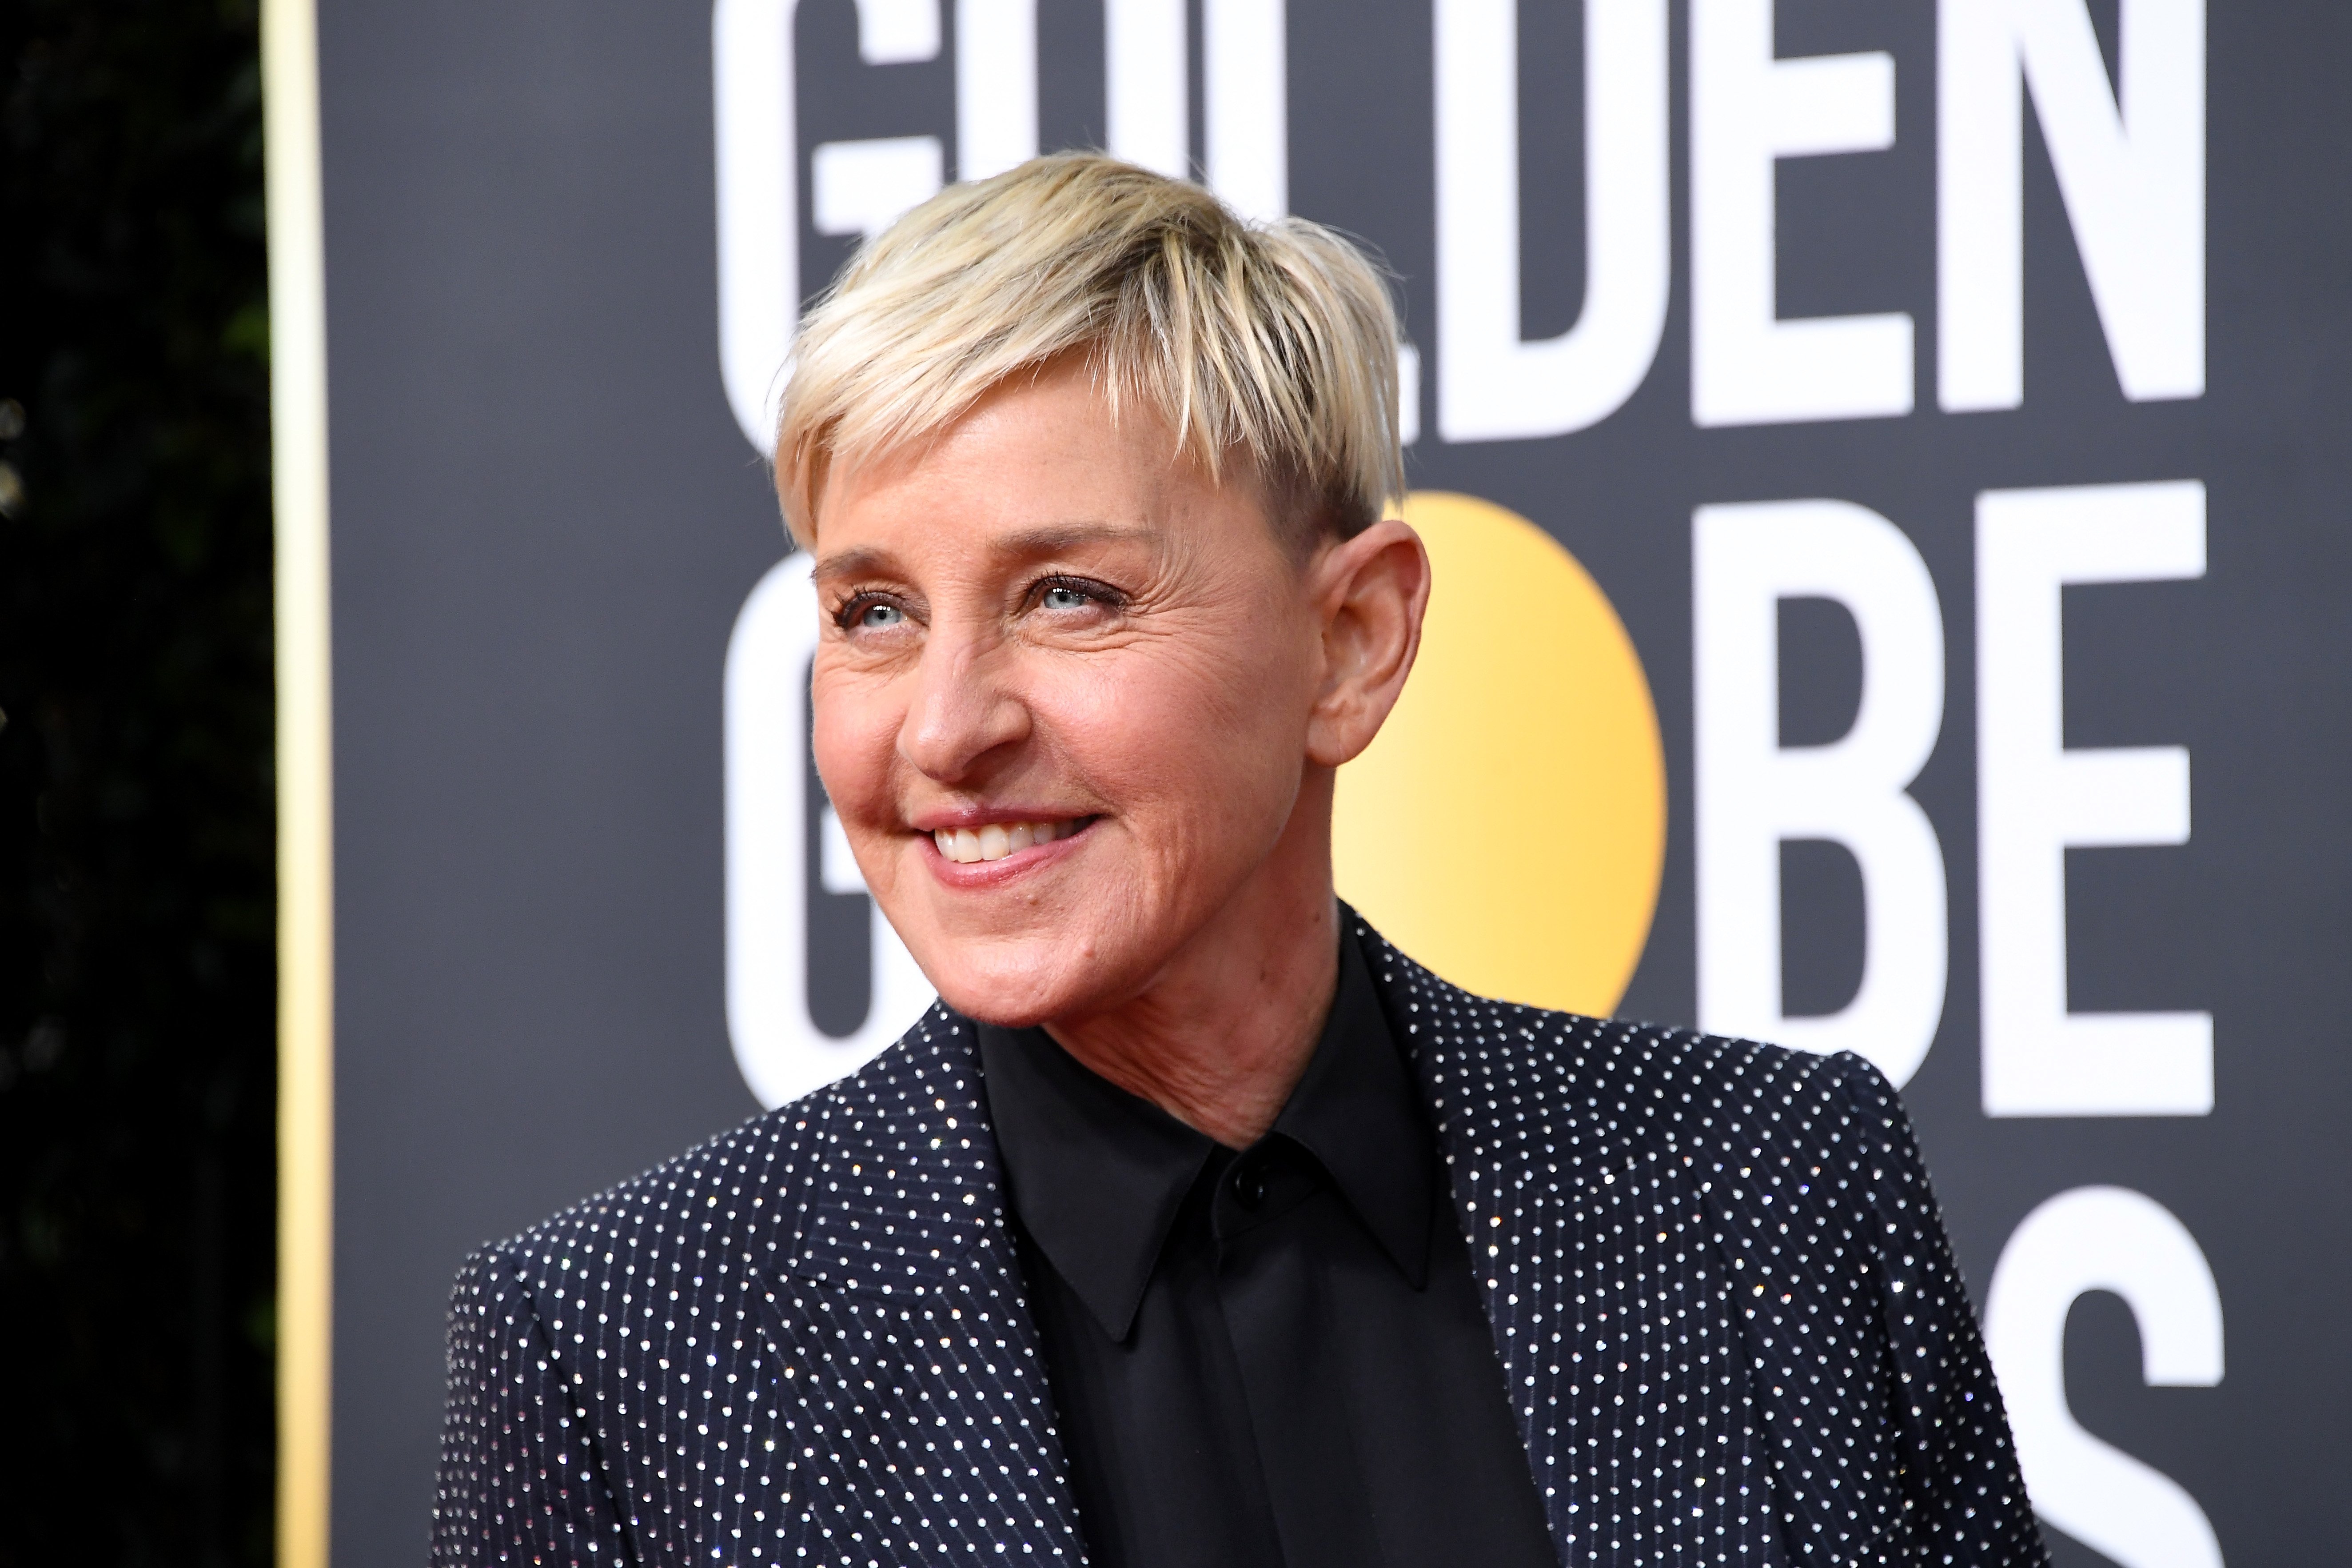  Ellen DeGeneres attends the 77th Annual Golden Globe Awards on January 05, 2020, in Beverly Hills, California. | Source: Getty Images.